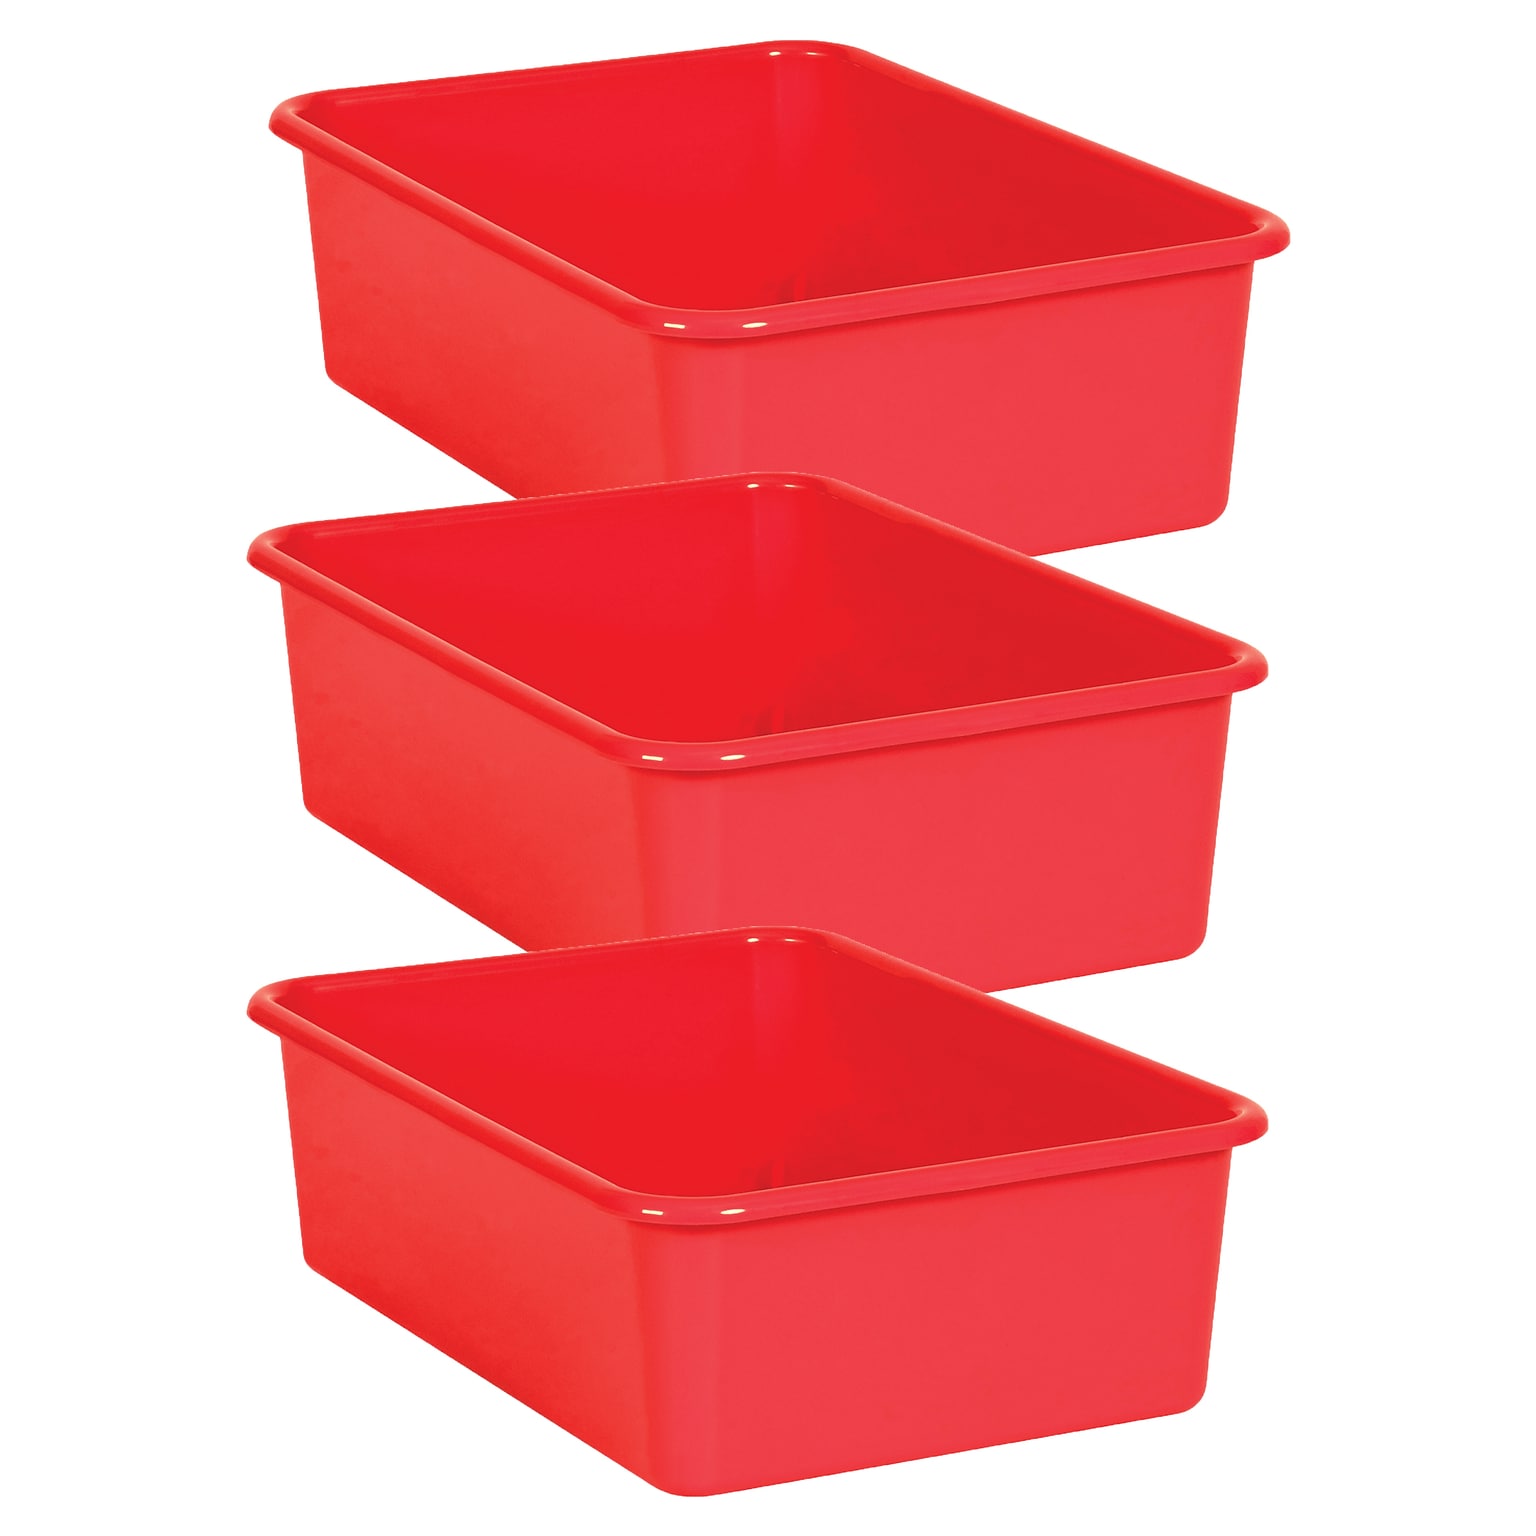 Teacher Created Resources® Plastic Storage Bin, Large, 16.25 x 11.5 x 5, Red, Pack of 3 (TCR20404-3)